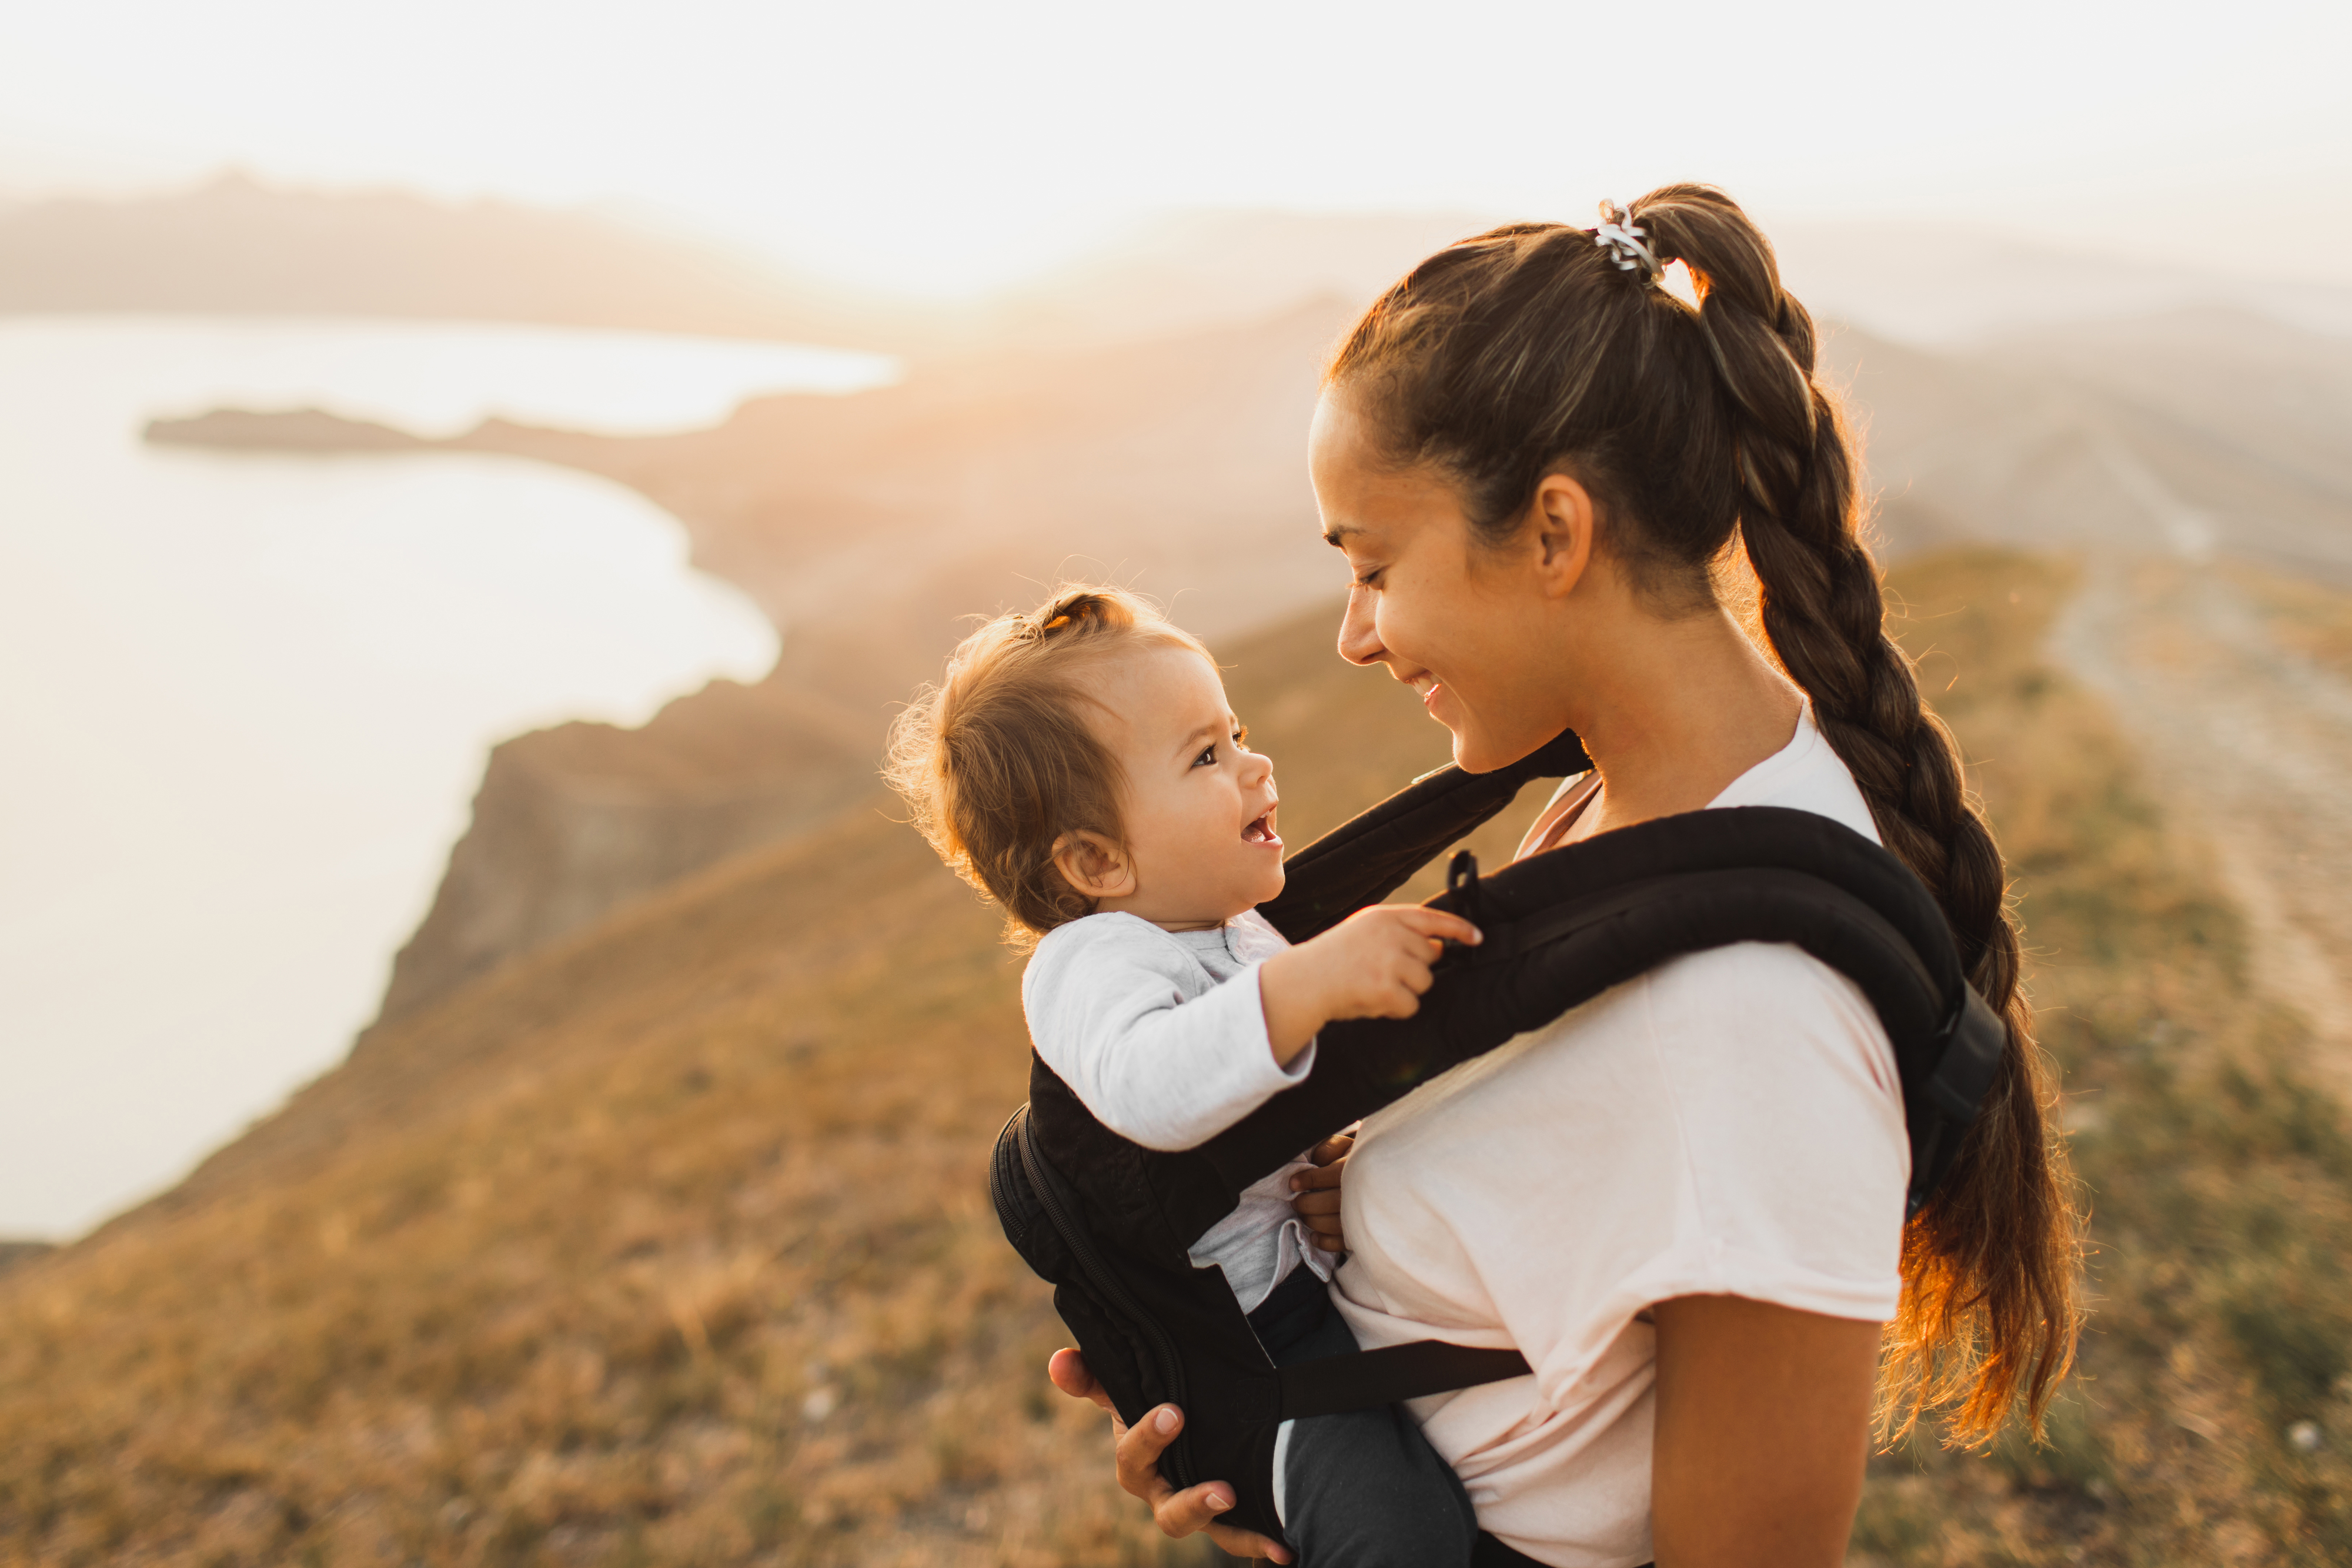 Woman with a baby in a carrier, both smiling, on a hillside at sunset